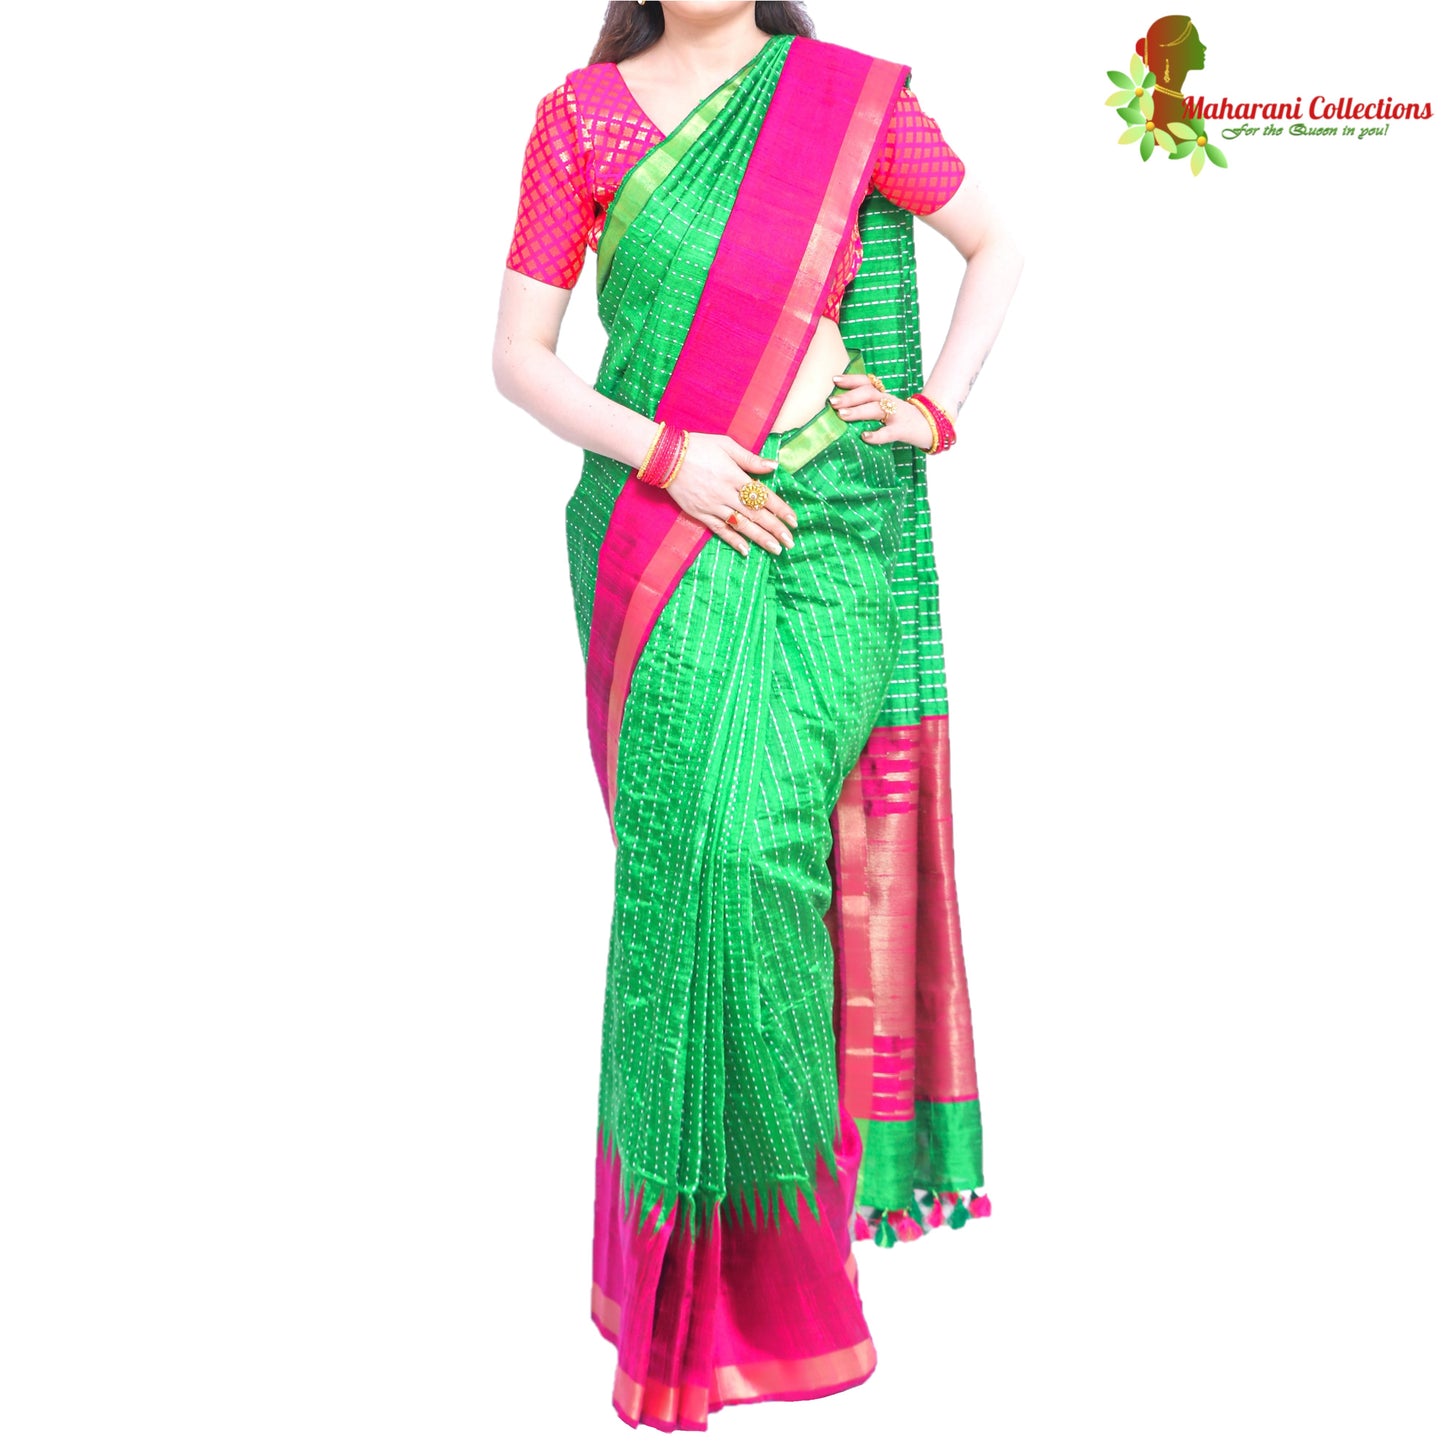 Pure Handloom Tussar Silk Saree - Green and Pink with Golden Zari and Temple Border